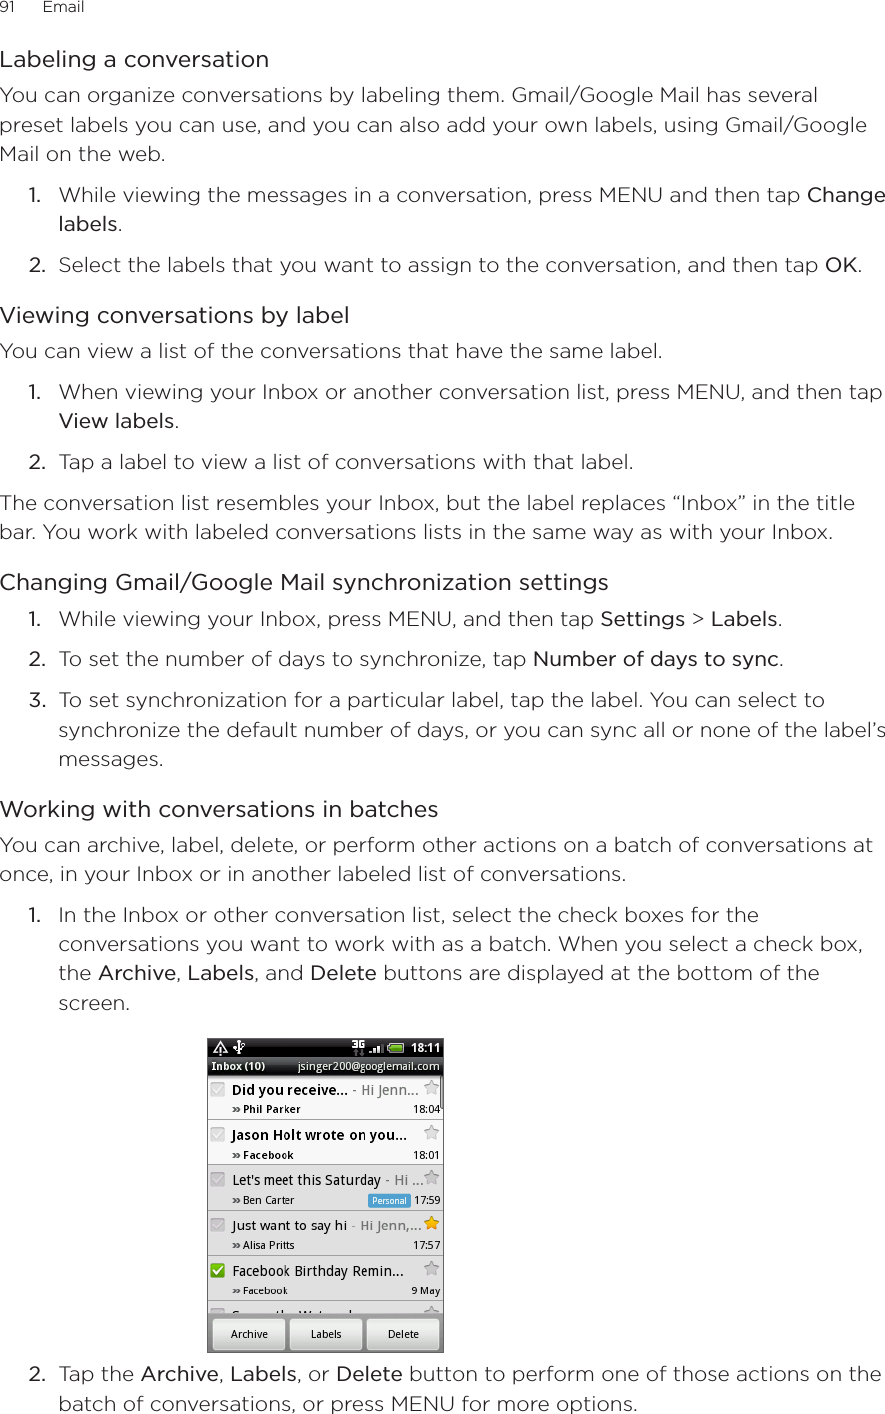 91      Email      Labeling a conversationYou can organize conversations by labeling them. Gmail/Google Mail has several preset labels you can use, and you can also add your own labels, using Gmail/Google Mail on the web.While viewing the messages in a conversation, press MENU and then tap Change labels.Select the labels that you want to assign to the conversation, and then tap OK.Viewing conversations by labelYou can view a list of the conversations that have the same label.1.  When viewing your Inbox or another conversation list, press MENU, and then tap View labels.2.  Tap a label to view a list of conversations with that label.The conversation list resembles your Inbox, but the label replaces “Inbox” in the title bar. You work with labeled conversations lists in the same way as with your Inbox.Changing Gmail/Google Mail synchronization settings1.  While viewing your Inbox, press MENU, and then tap Settings &gt; Labels.2.  To set the number of days to synchronize, tap Number of days to sync.3.  To set synchronization for a particular label, tap the label. You can select to synchronize the default number of days, or you can sync all or none of the label’s messages.Working with conversations in batchesYou can archive, label, delete, or perform other actions on a batch of conversations at once, in your Inbox or in another labeled list of conversations.1.  In the Inbox or other conversation list, select the check boxes for the conversations you want to work with as a batch. When you select a check box, the Archive, Labels, and Delete buttons are displayed at the bottom of the screen.2.  Tap the Archive, Labels, or Delete button to perform one of those actions on the batch of conversations, or press MENU for more options.1.2.